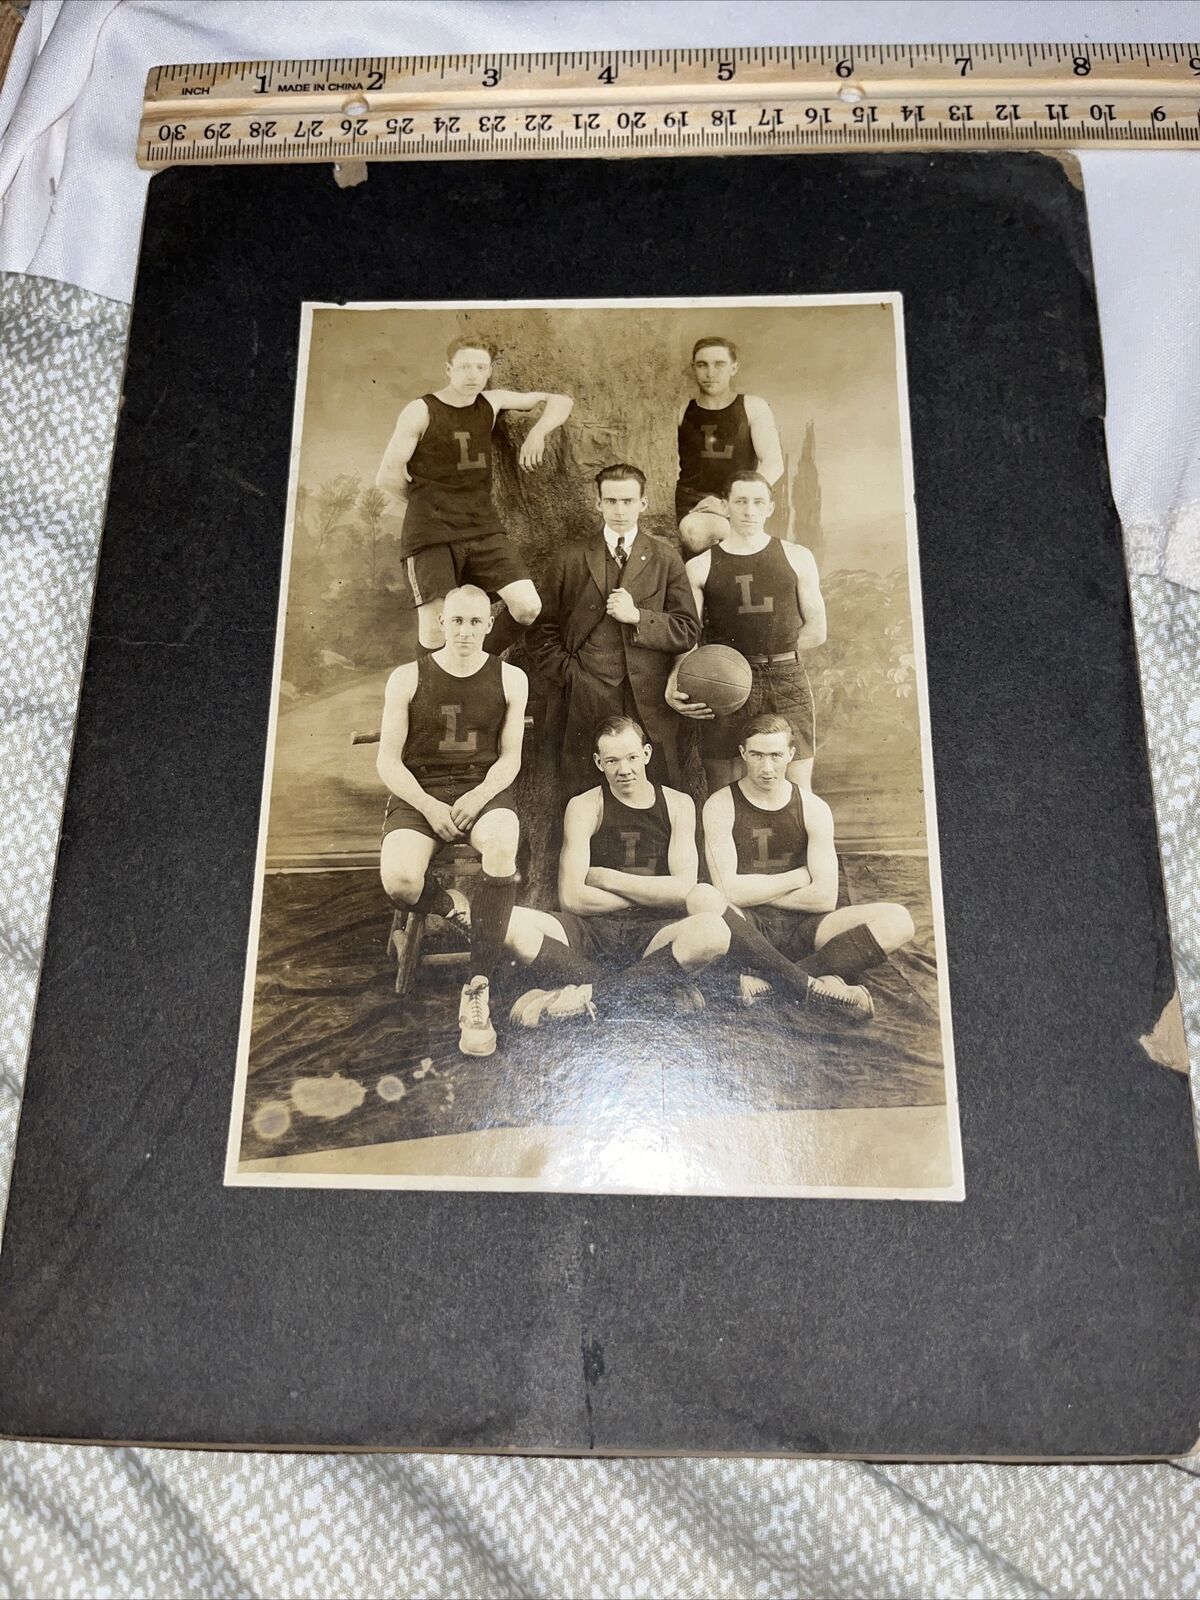 Antique 1913 Mounted Photo: Early Young Men’s Basketball Team - Perhaps Lehigh?